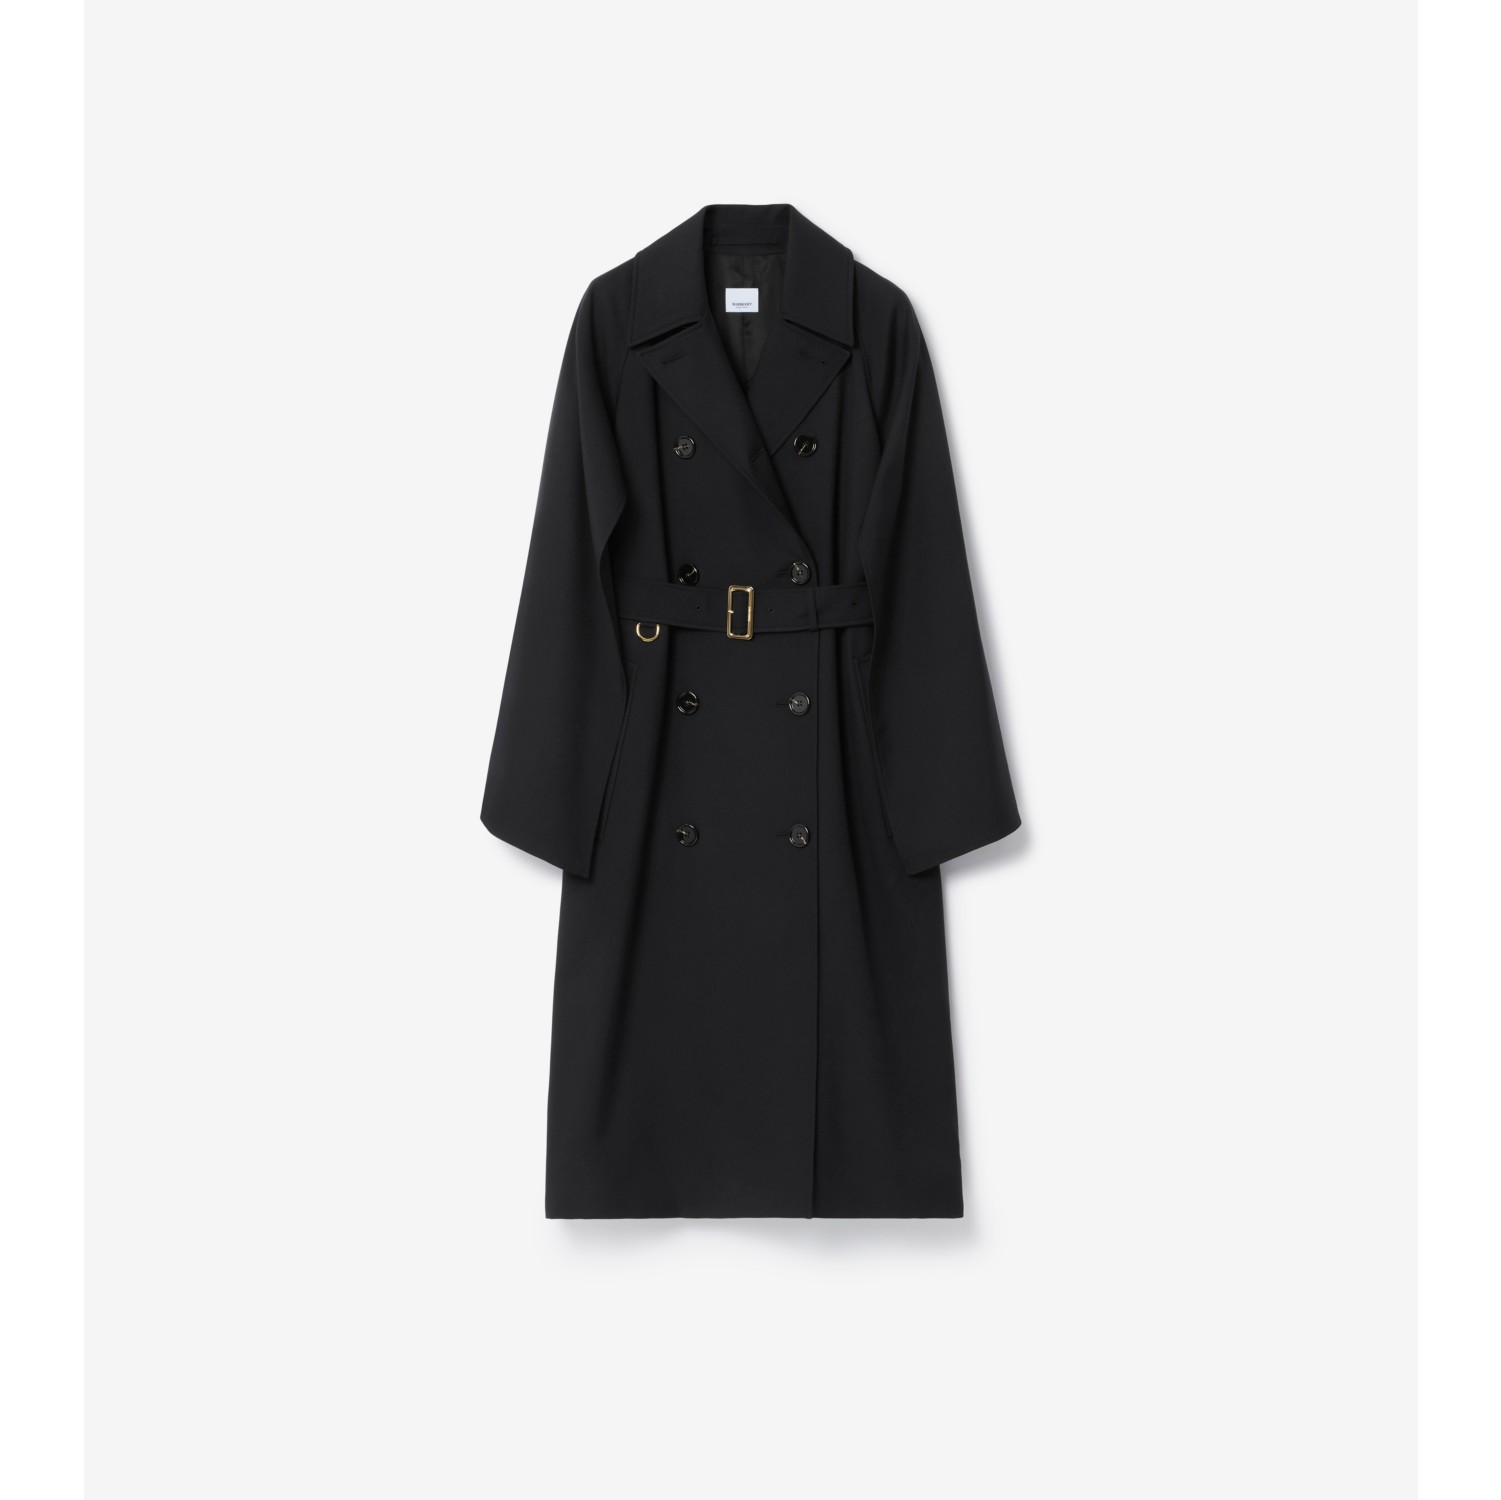 absolutte plasticitet At hoppe Wool Blend Trench Coat in Black - Women | Burberry® Official